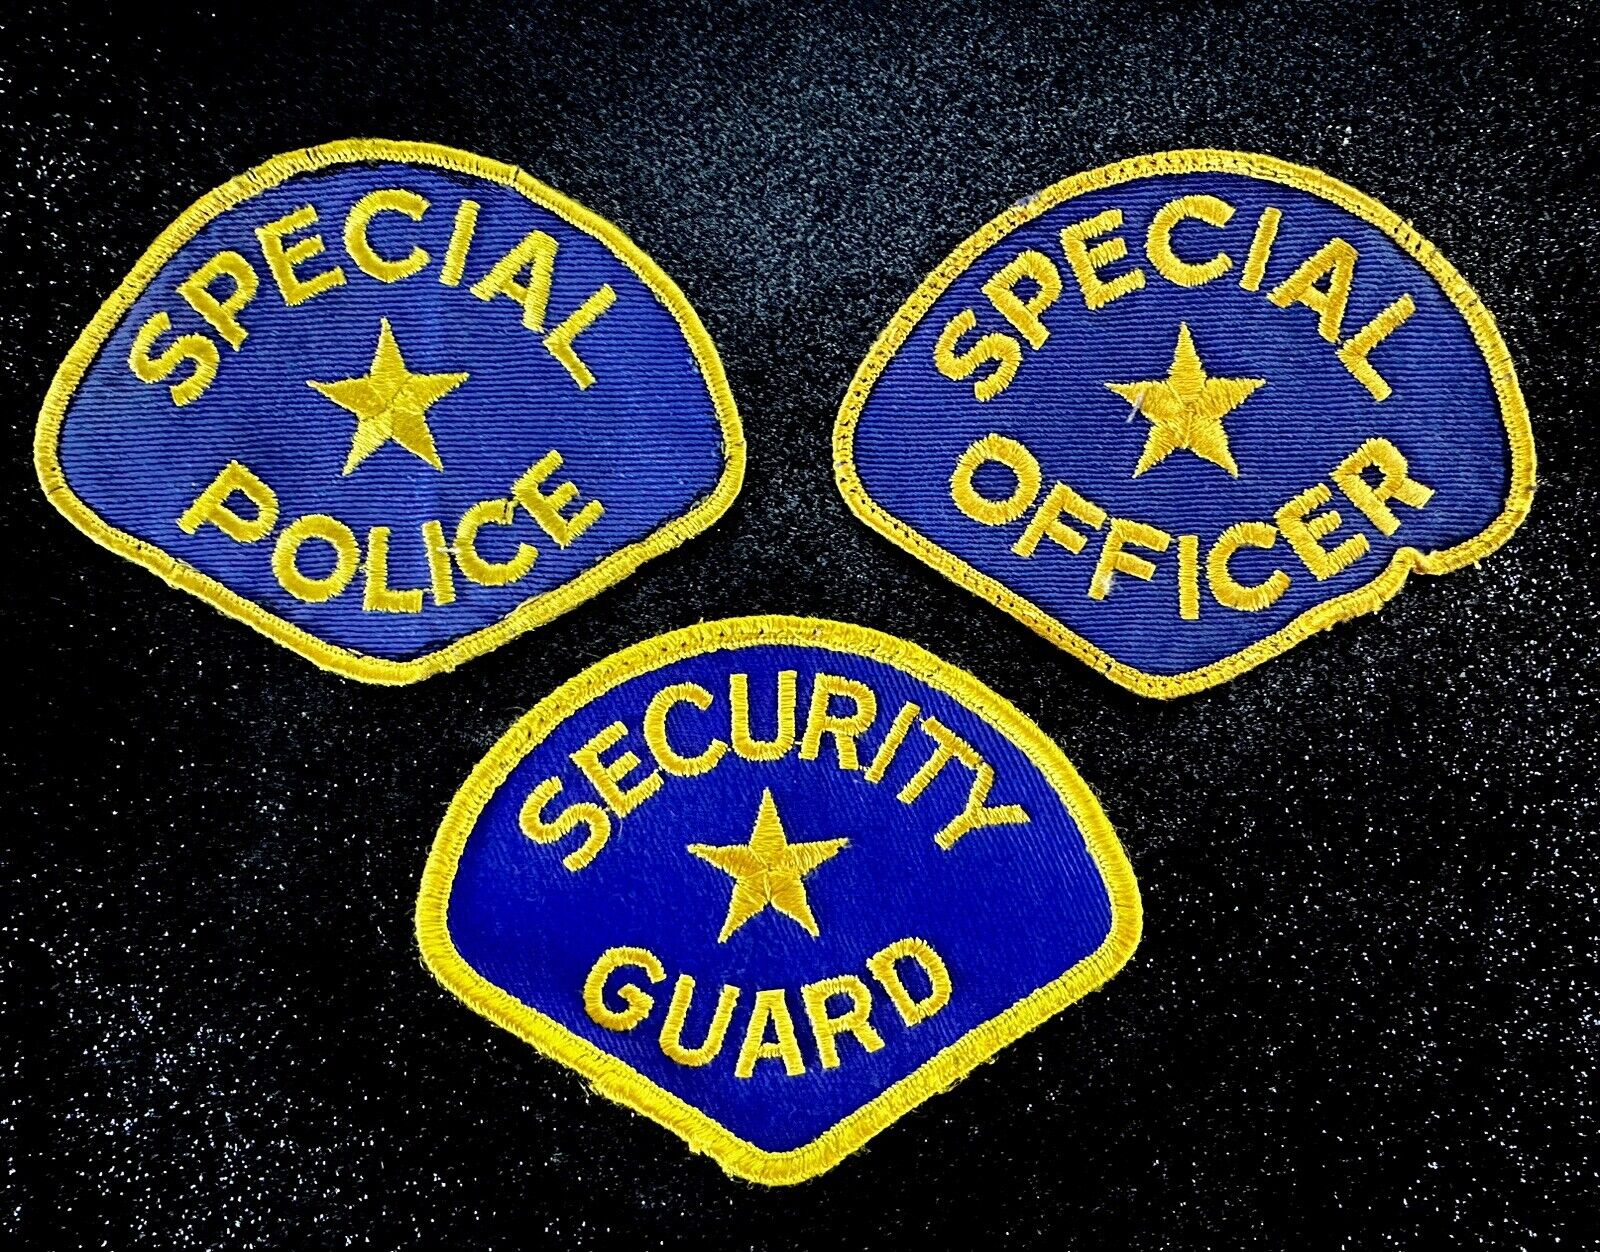 Special Police Special Officer  Security Guard Lot of 3 Patches ~ Vintage